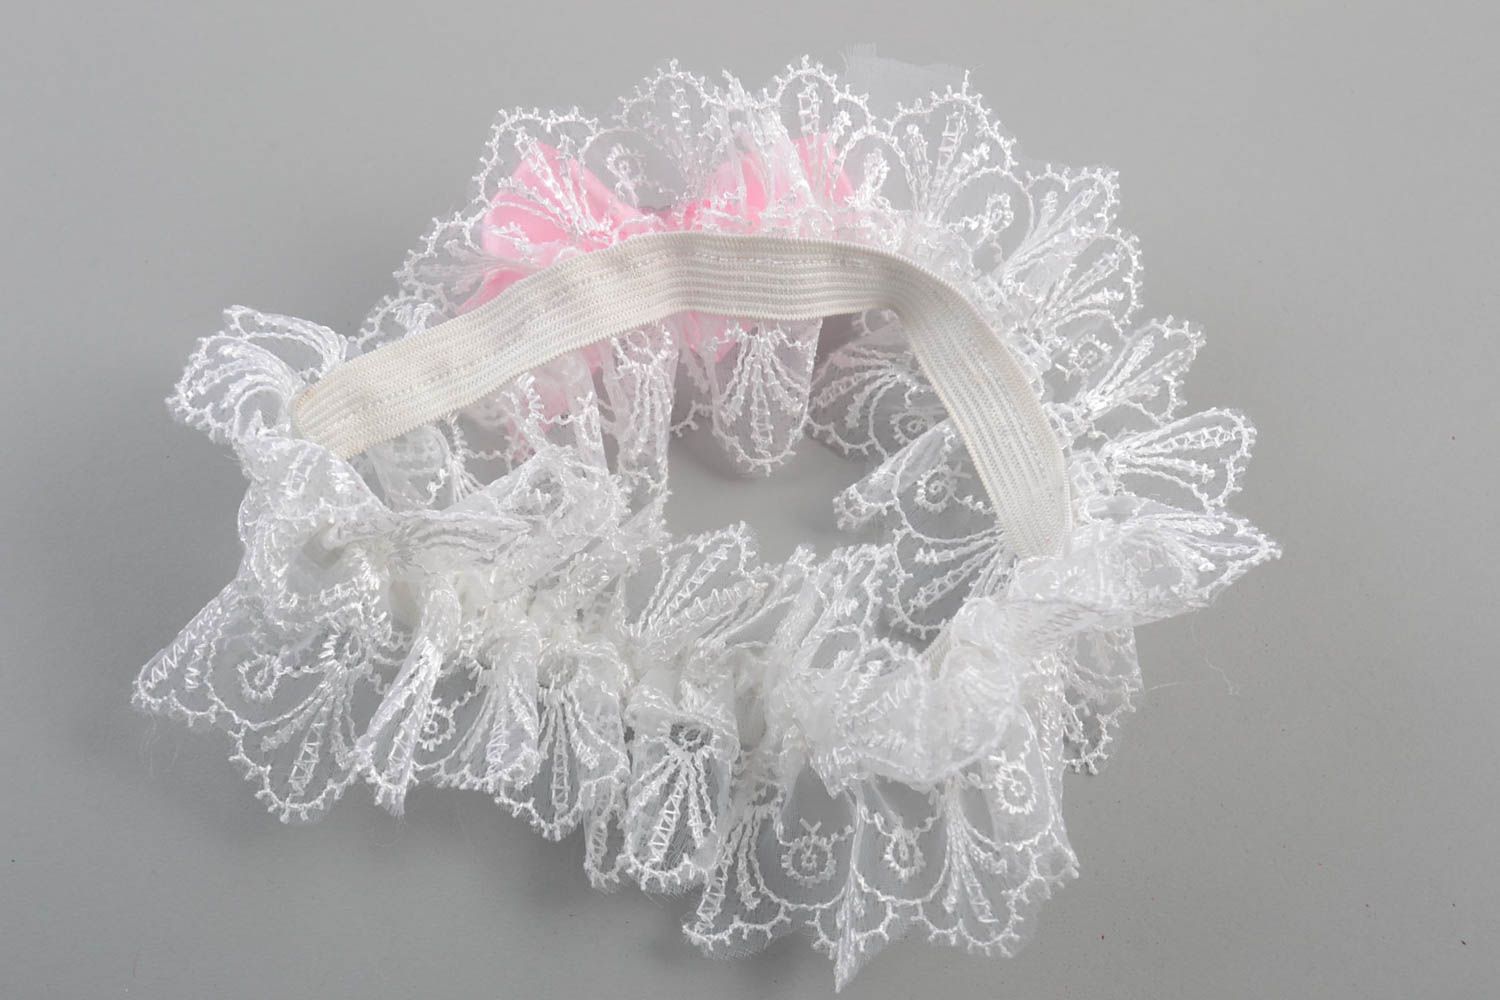 Handmade white and pink wedding garter for bride made of satin and guipure  photo 5